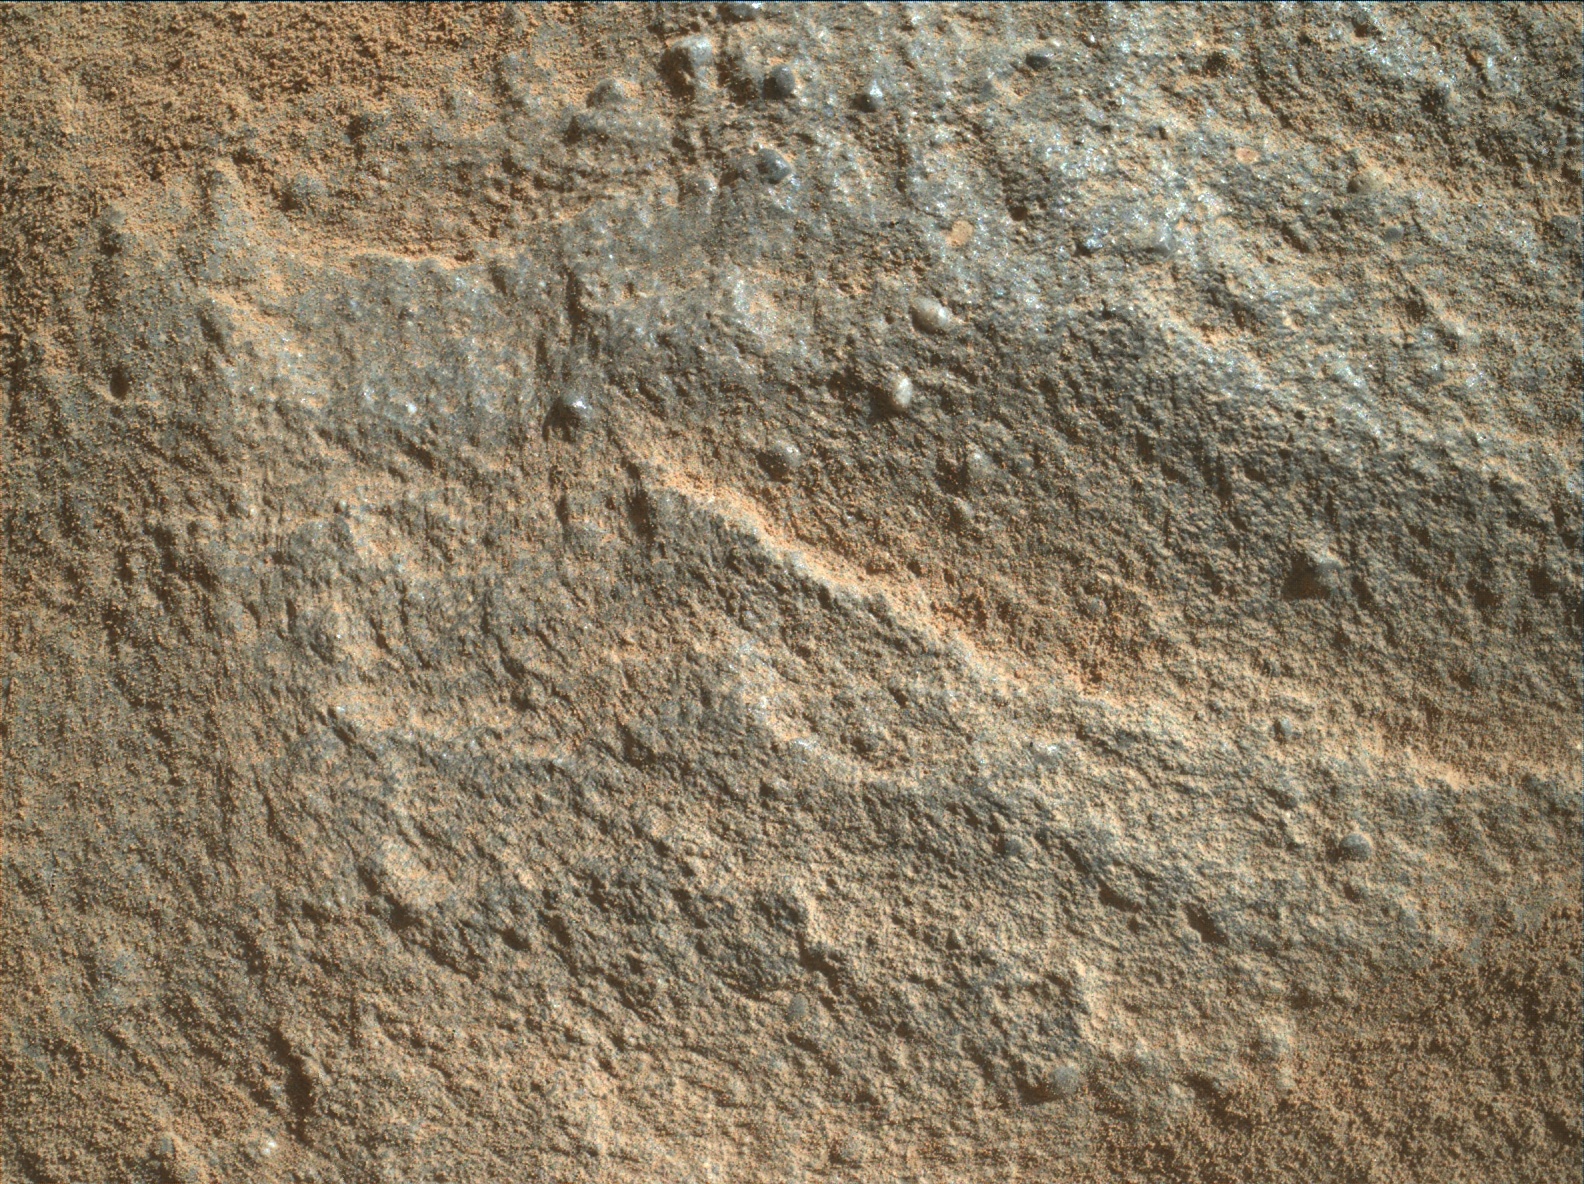 Nasa's Mars rover Curiosity acquired this image using its Mars Hand Lens Imager (MAHLI) on Sol 1288